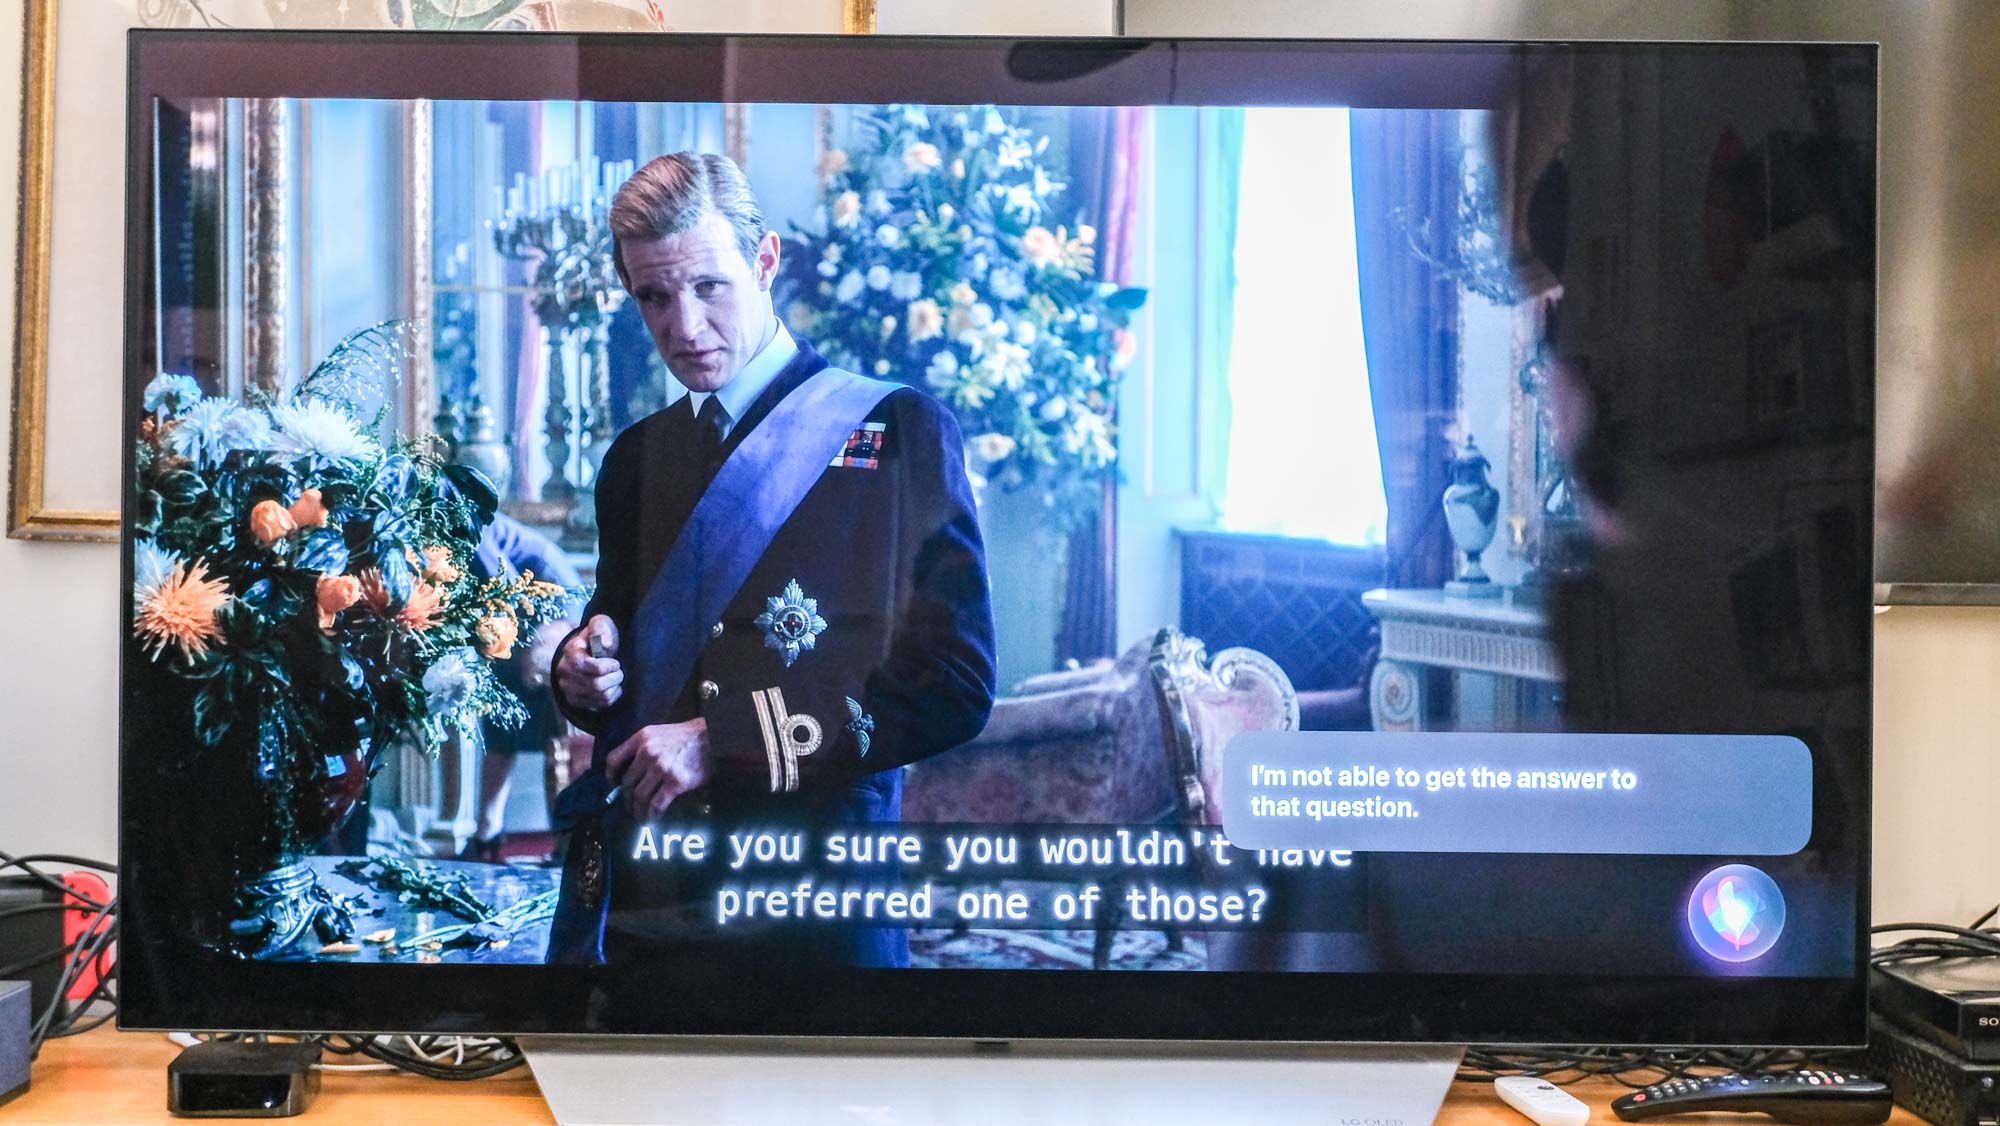 Matt Smith as Prince Philip in The Crown, appears next to a message that says "I'm not able to get the answer to that question" on a TV connected to the Apple TV 4K (2022)